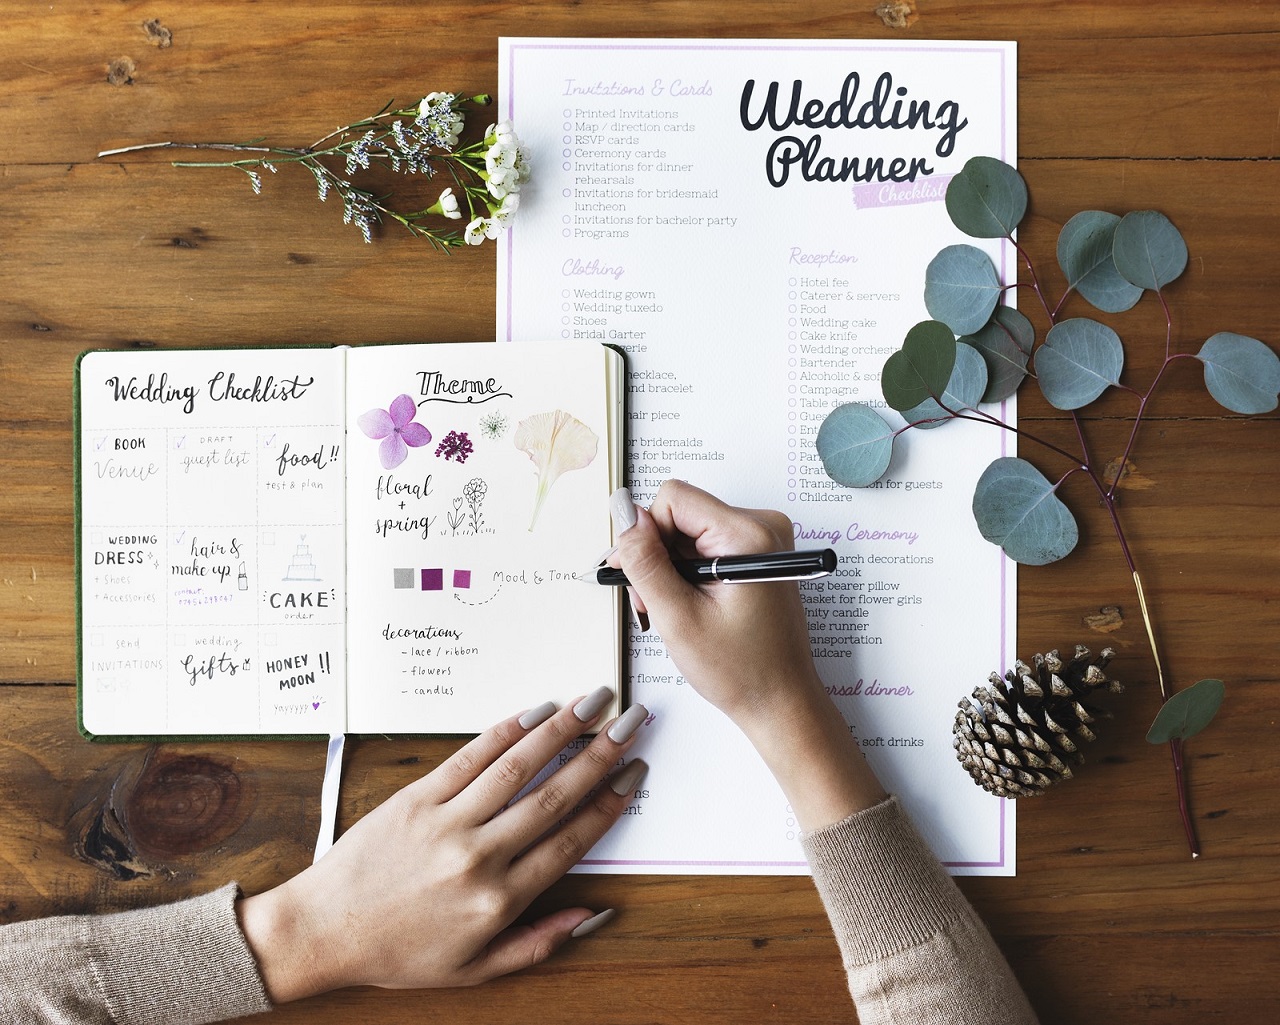 Planning the Wedding on Your Own? Here are 4 Questions to Ask Before Doing So